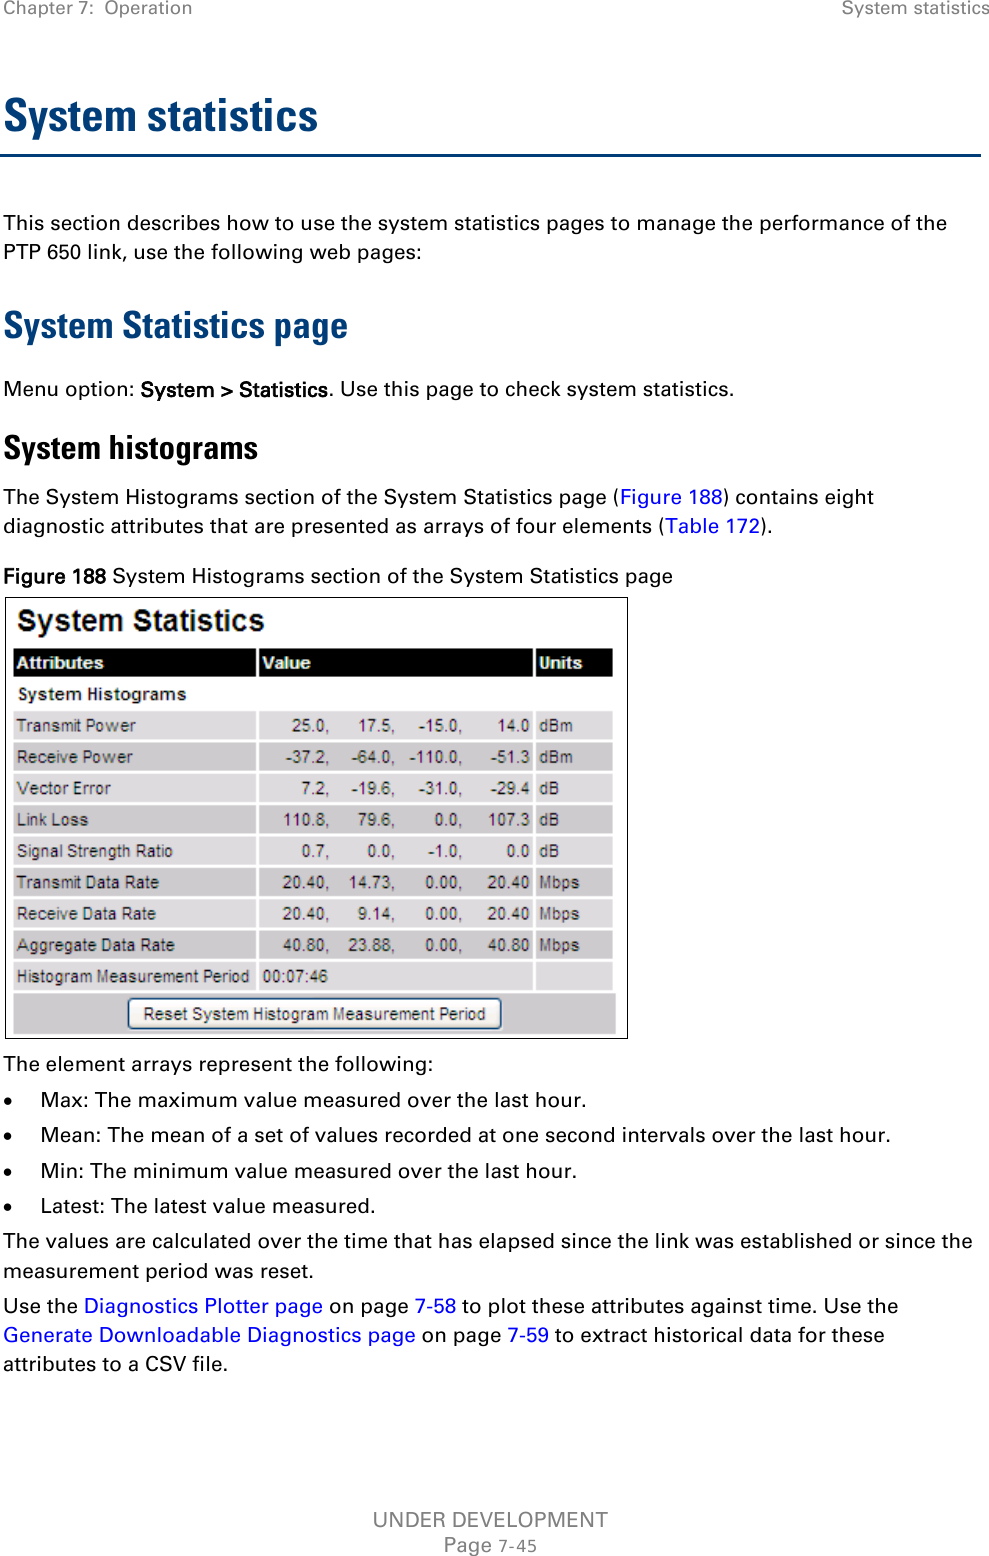 Chapter 7:  Operation System statistics  System statistics This section describes how to use the system statistics pages to manage the performance of the PTP 650 link, use the following web pages: System Statistics page Menu option: System &gt; Statistics. Use this page to check system statistics.  System histograms The System Histograms section of the System Statistics page (Figure 188) contains eight diagnostic attributes that are presented as arrays of four elements (Table 172). Figure 188 System Histograms section of the System Statistics page  The element arrays represent the following: • Max: The maximum value measured over the last hour. • Mean: The mean of a set of values recorded at one second intervals over the last hour. • Min: The minimum value measured over the last hour. • Latest: The latest value measured.  The values are calculated over the time that has elapsed since the link was established or since the measurement period was reset. Use the Diagnostics Plotter page on page 7-58 to plot these attributes against time. Use the Generate Downloadable Diagnostics page on page 7-59 to extract historical data for these attributes to a CSV file. UNDER DEVELOPMENT Page 7-45 